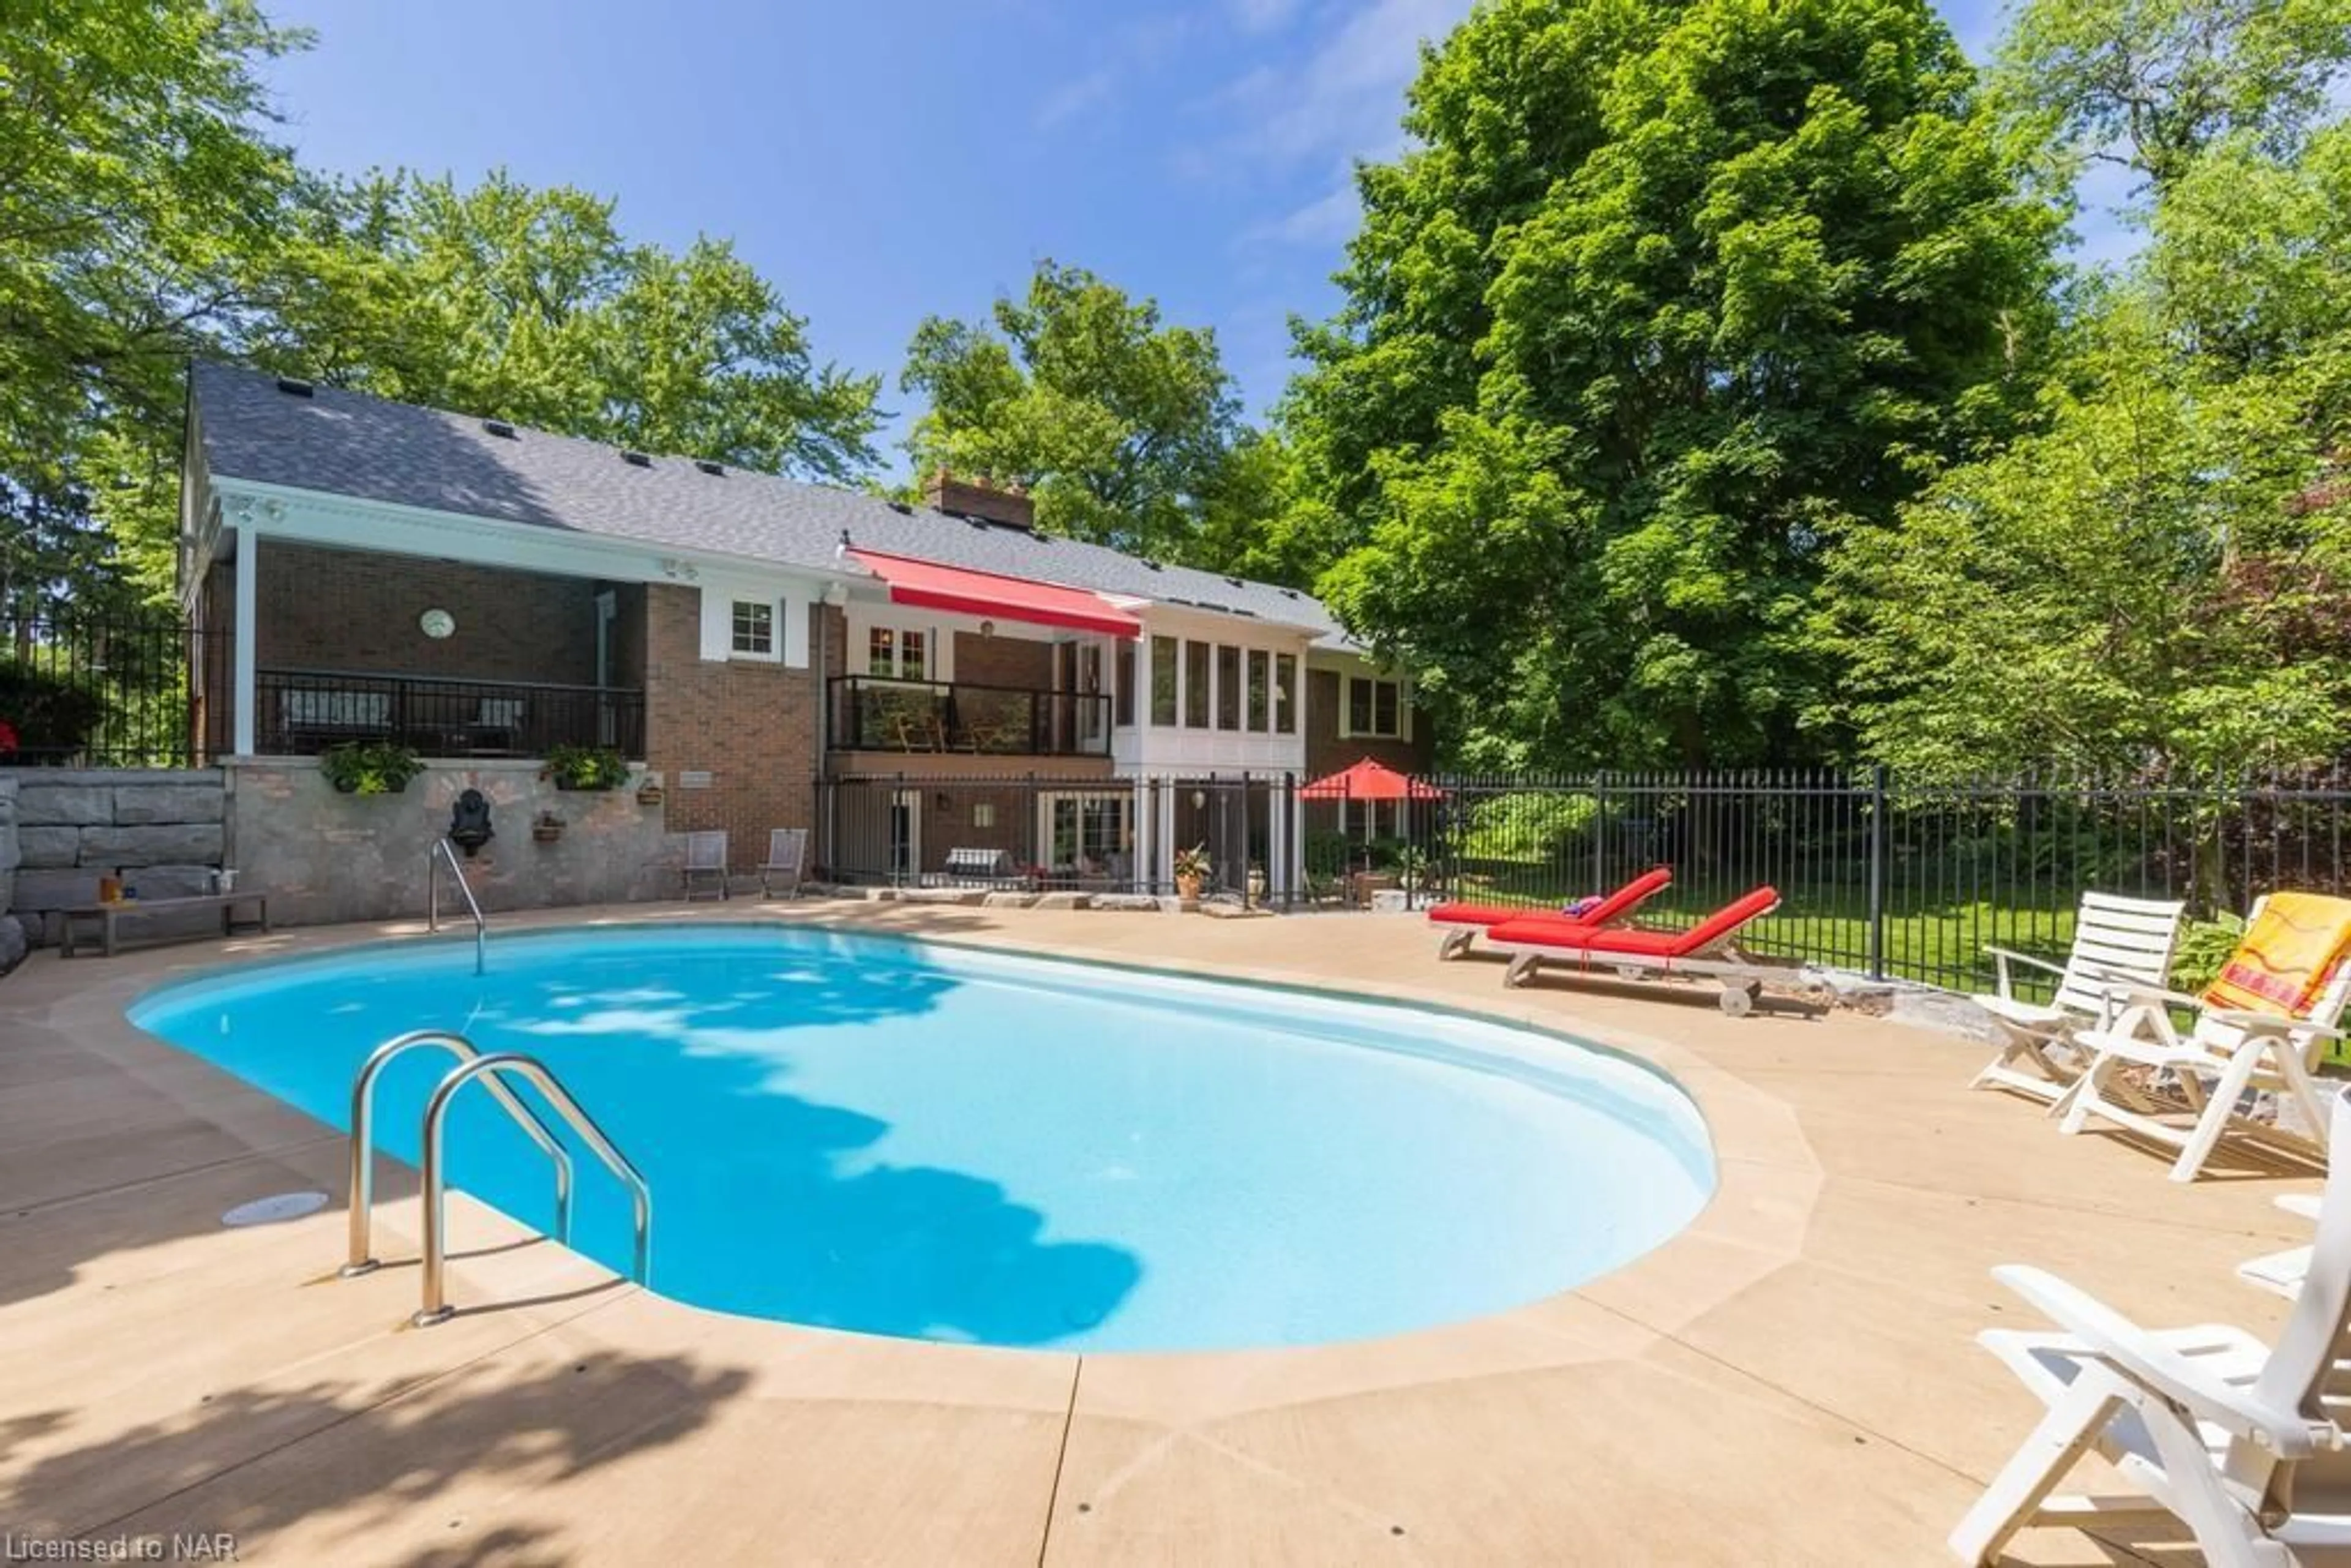 Indoor or outdoor pool for 276 Mississagua St, Niagara-on-the-Lake Ontario L0S 1J0